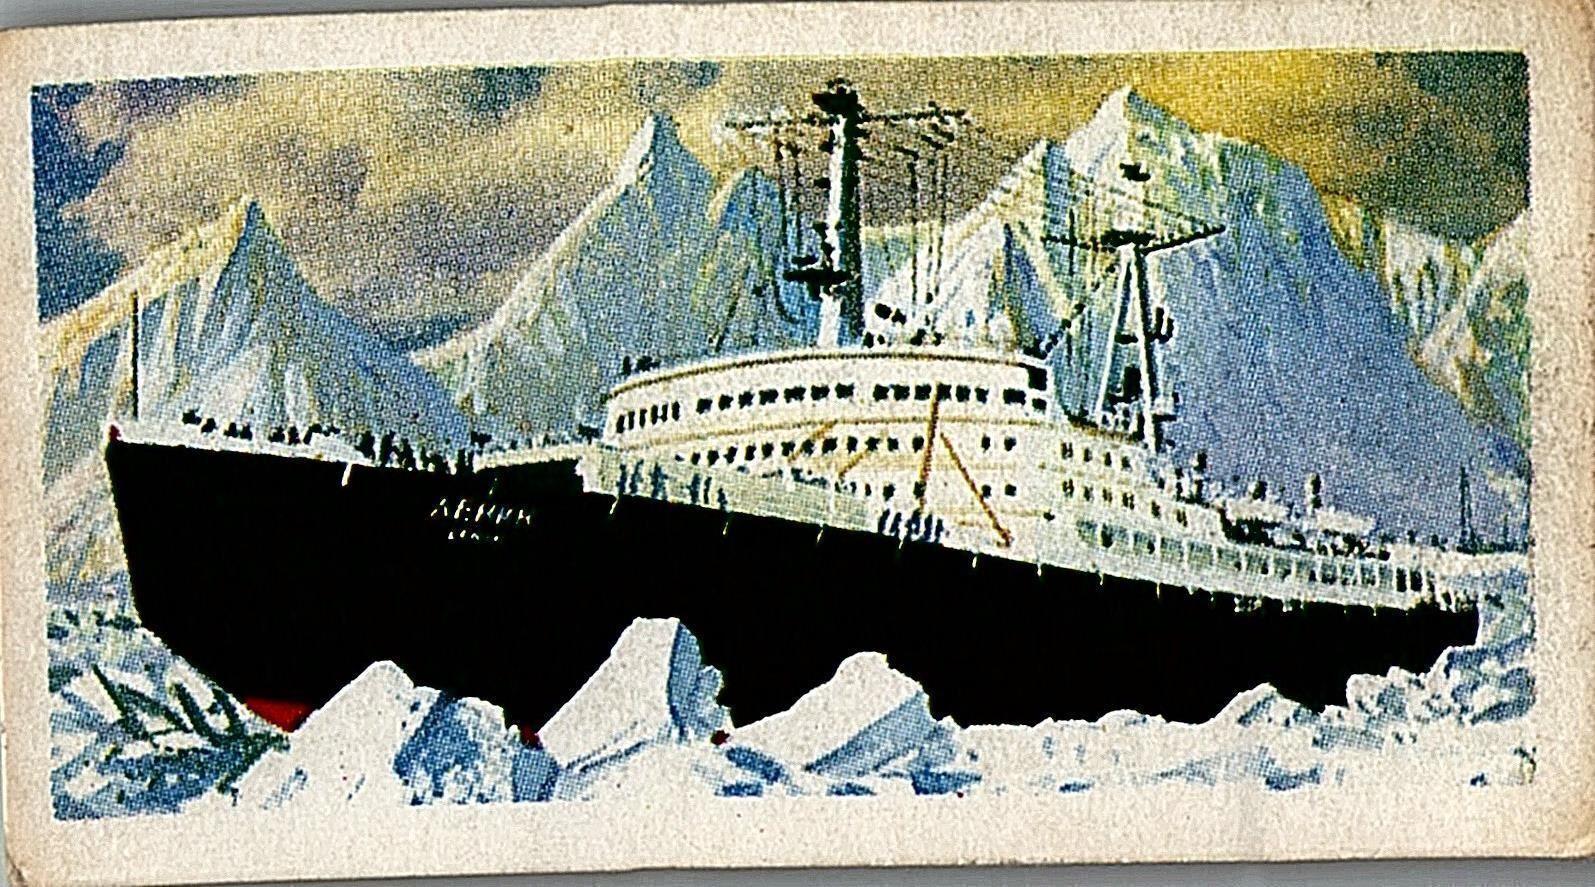 1930s BROOKE BOND TEA TRANSPORT THROUGH THE AGES #48 NUCLEAR SHIP 34-4